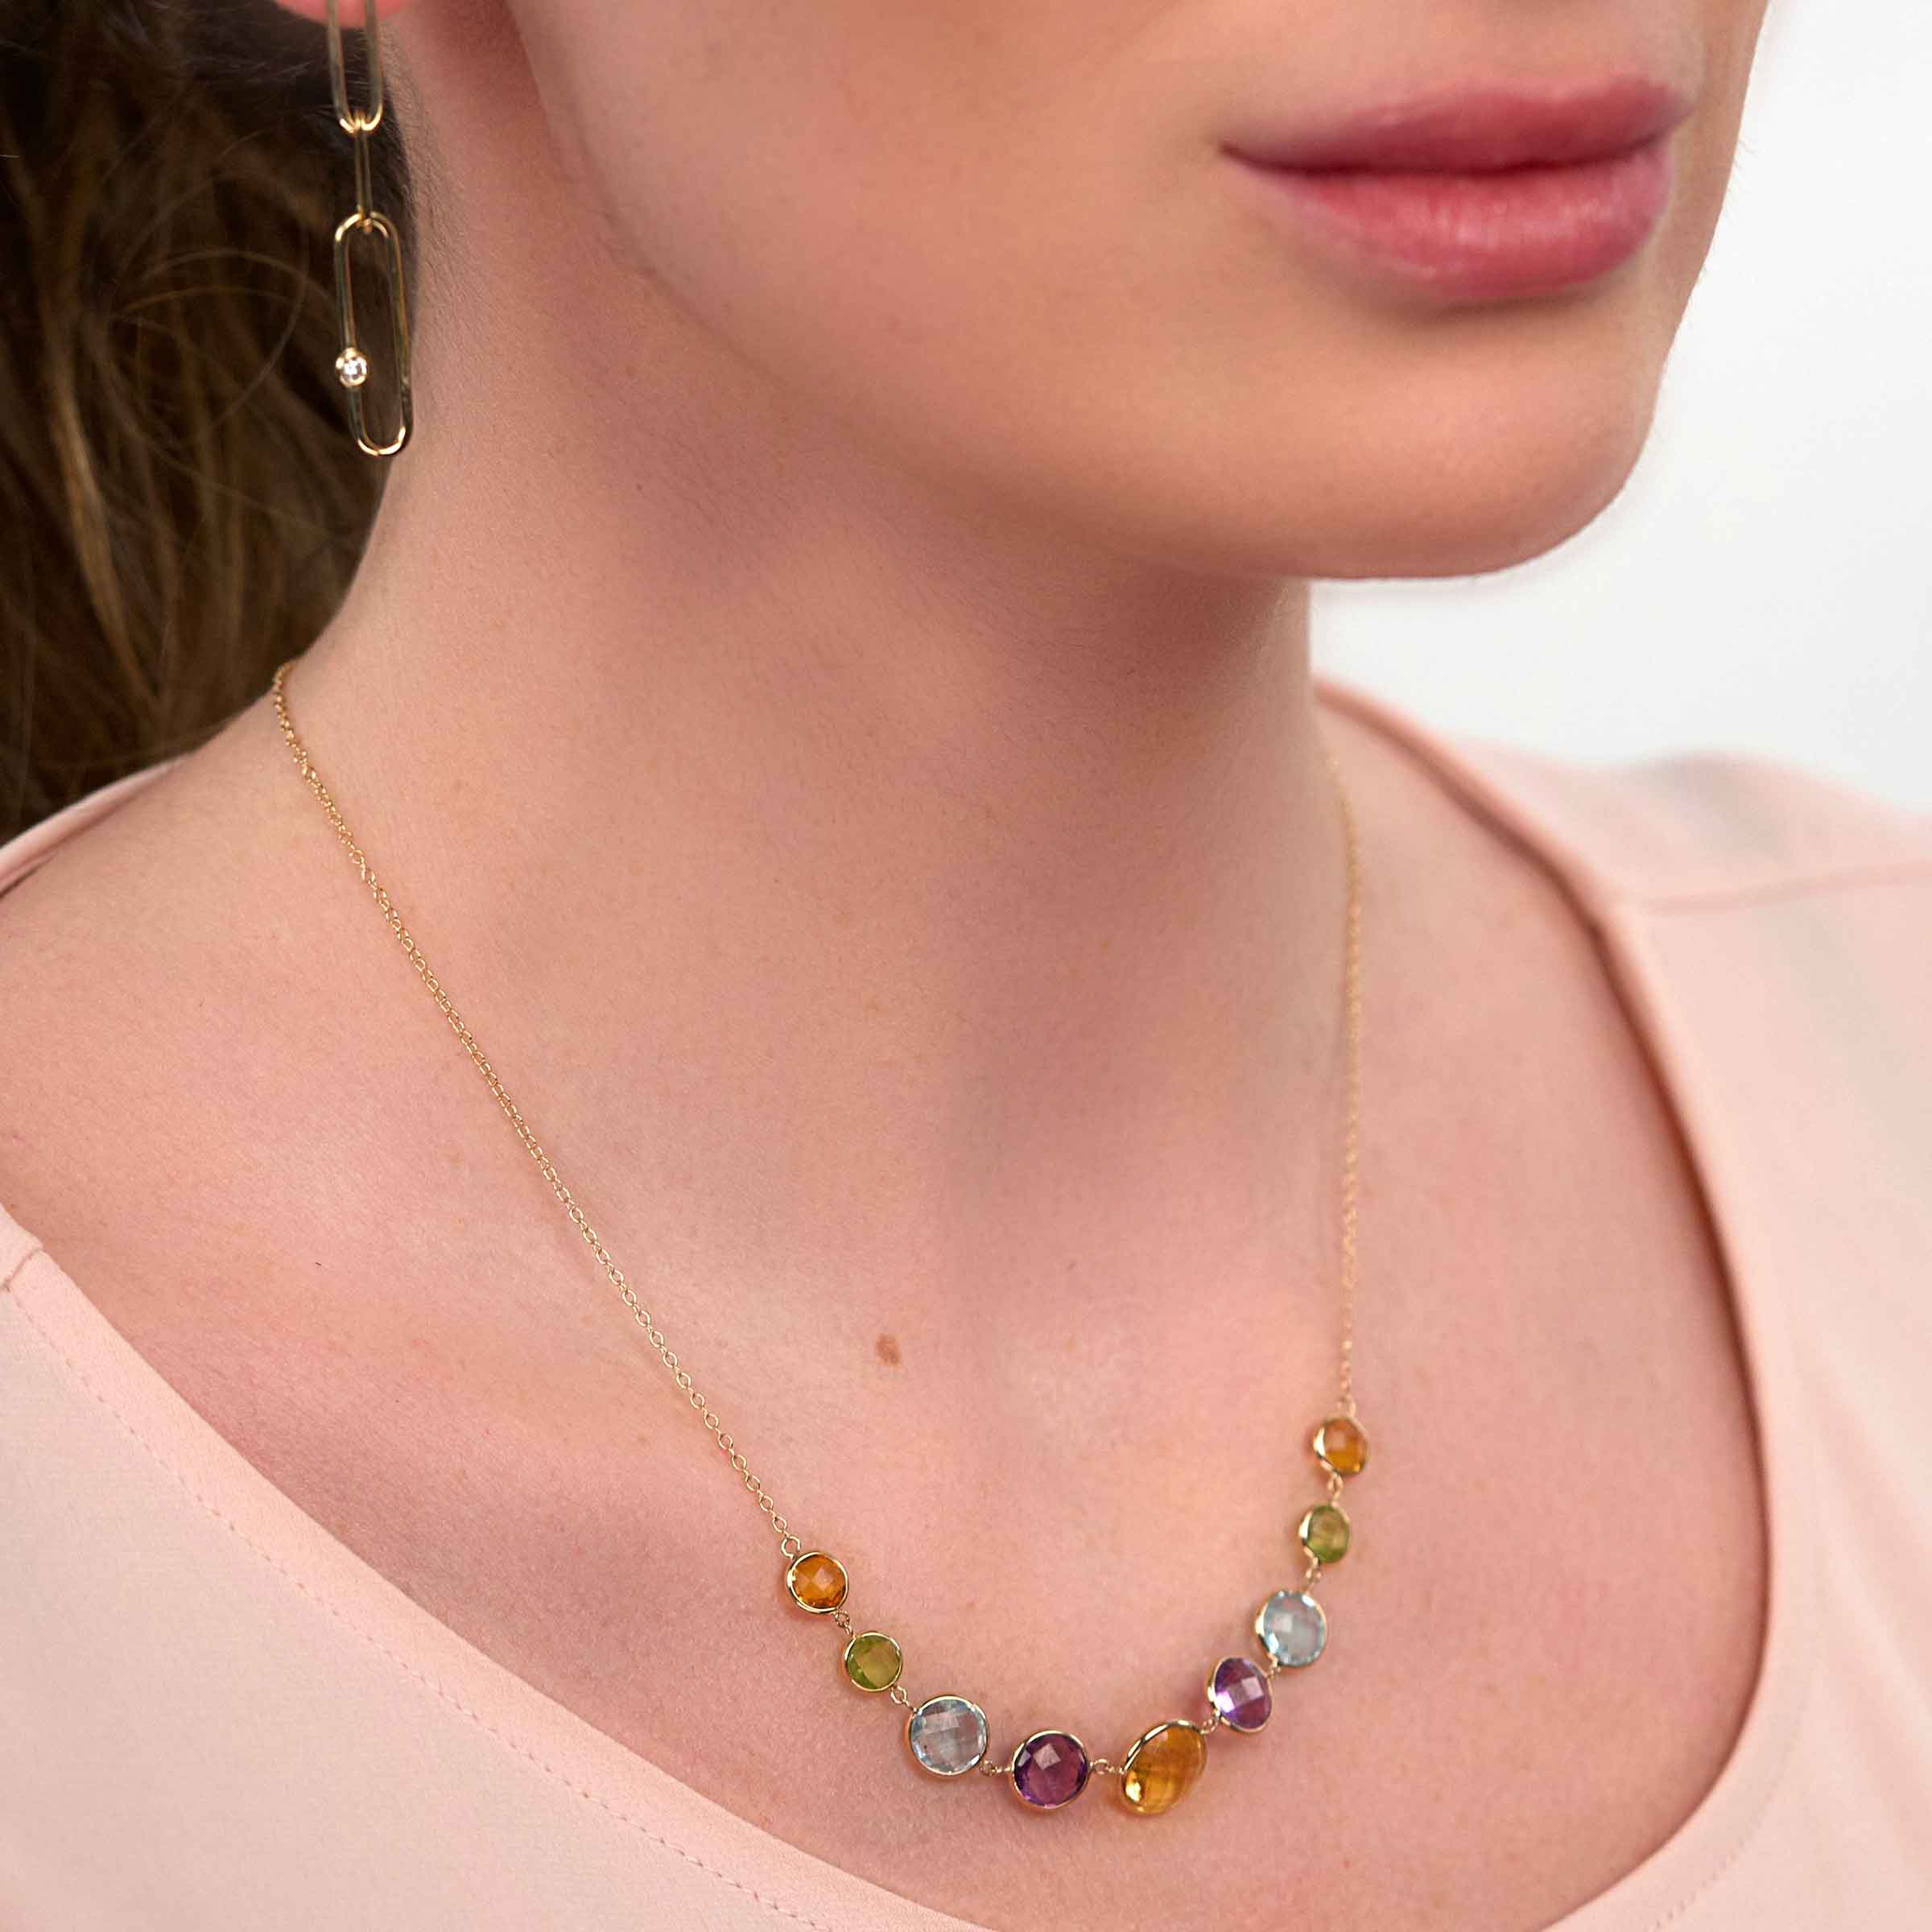 Holiday Gift Guide: The Best Colored Gemstone Necklaces